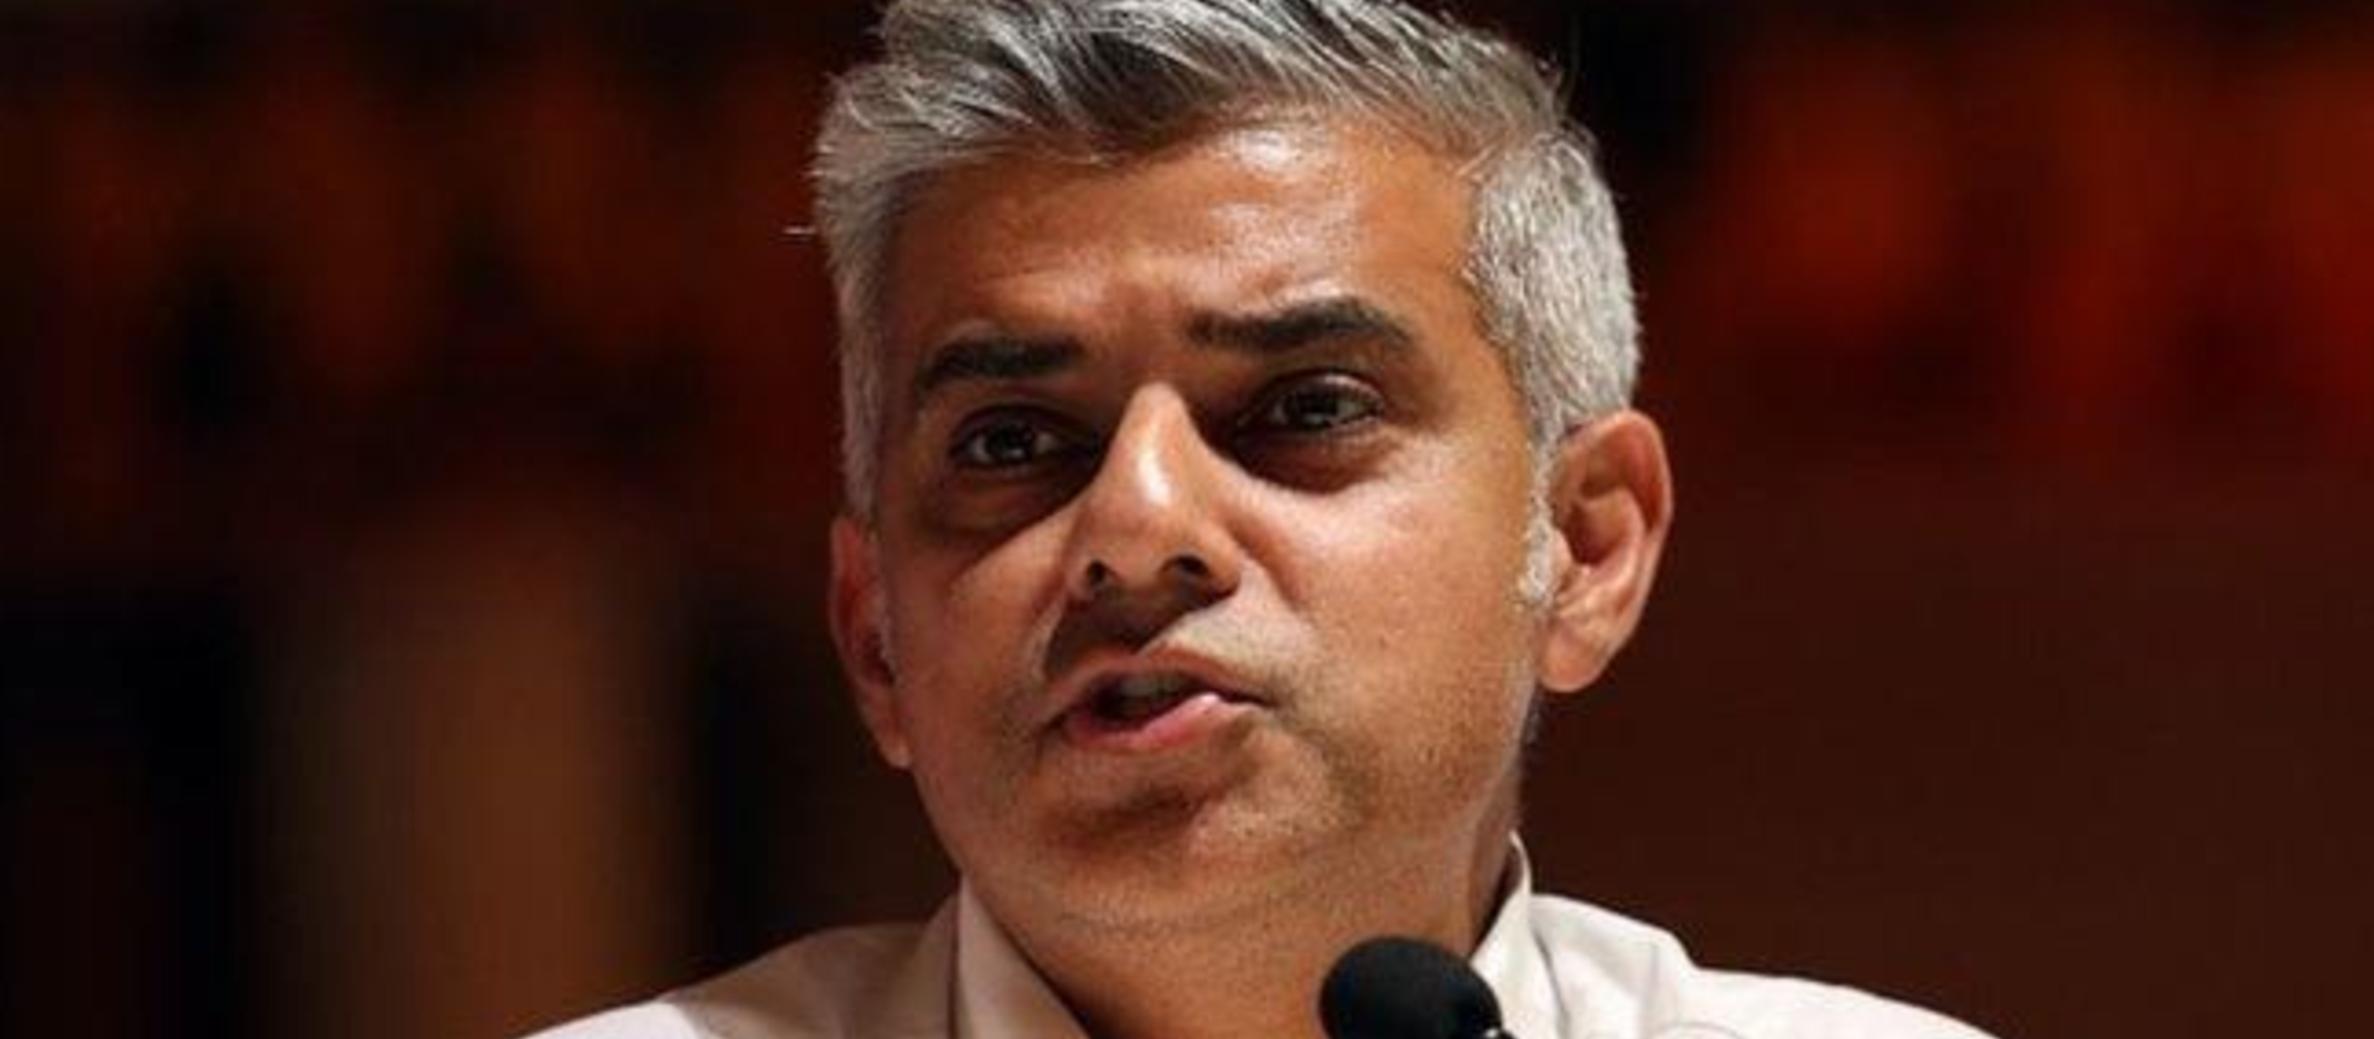 London’s first Muslim mayor targeted with anti-Semitism after attending Holocaust event